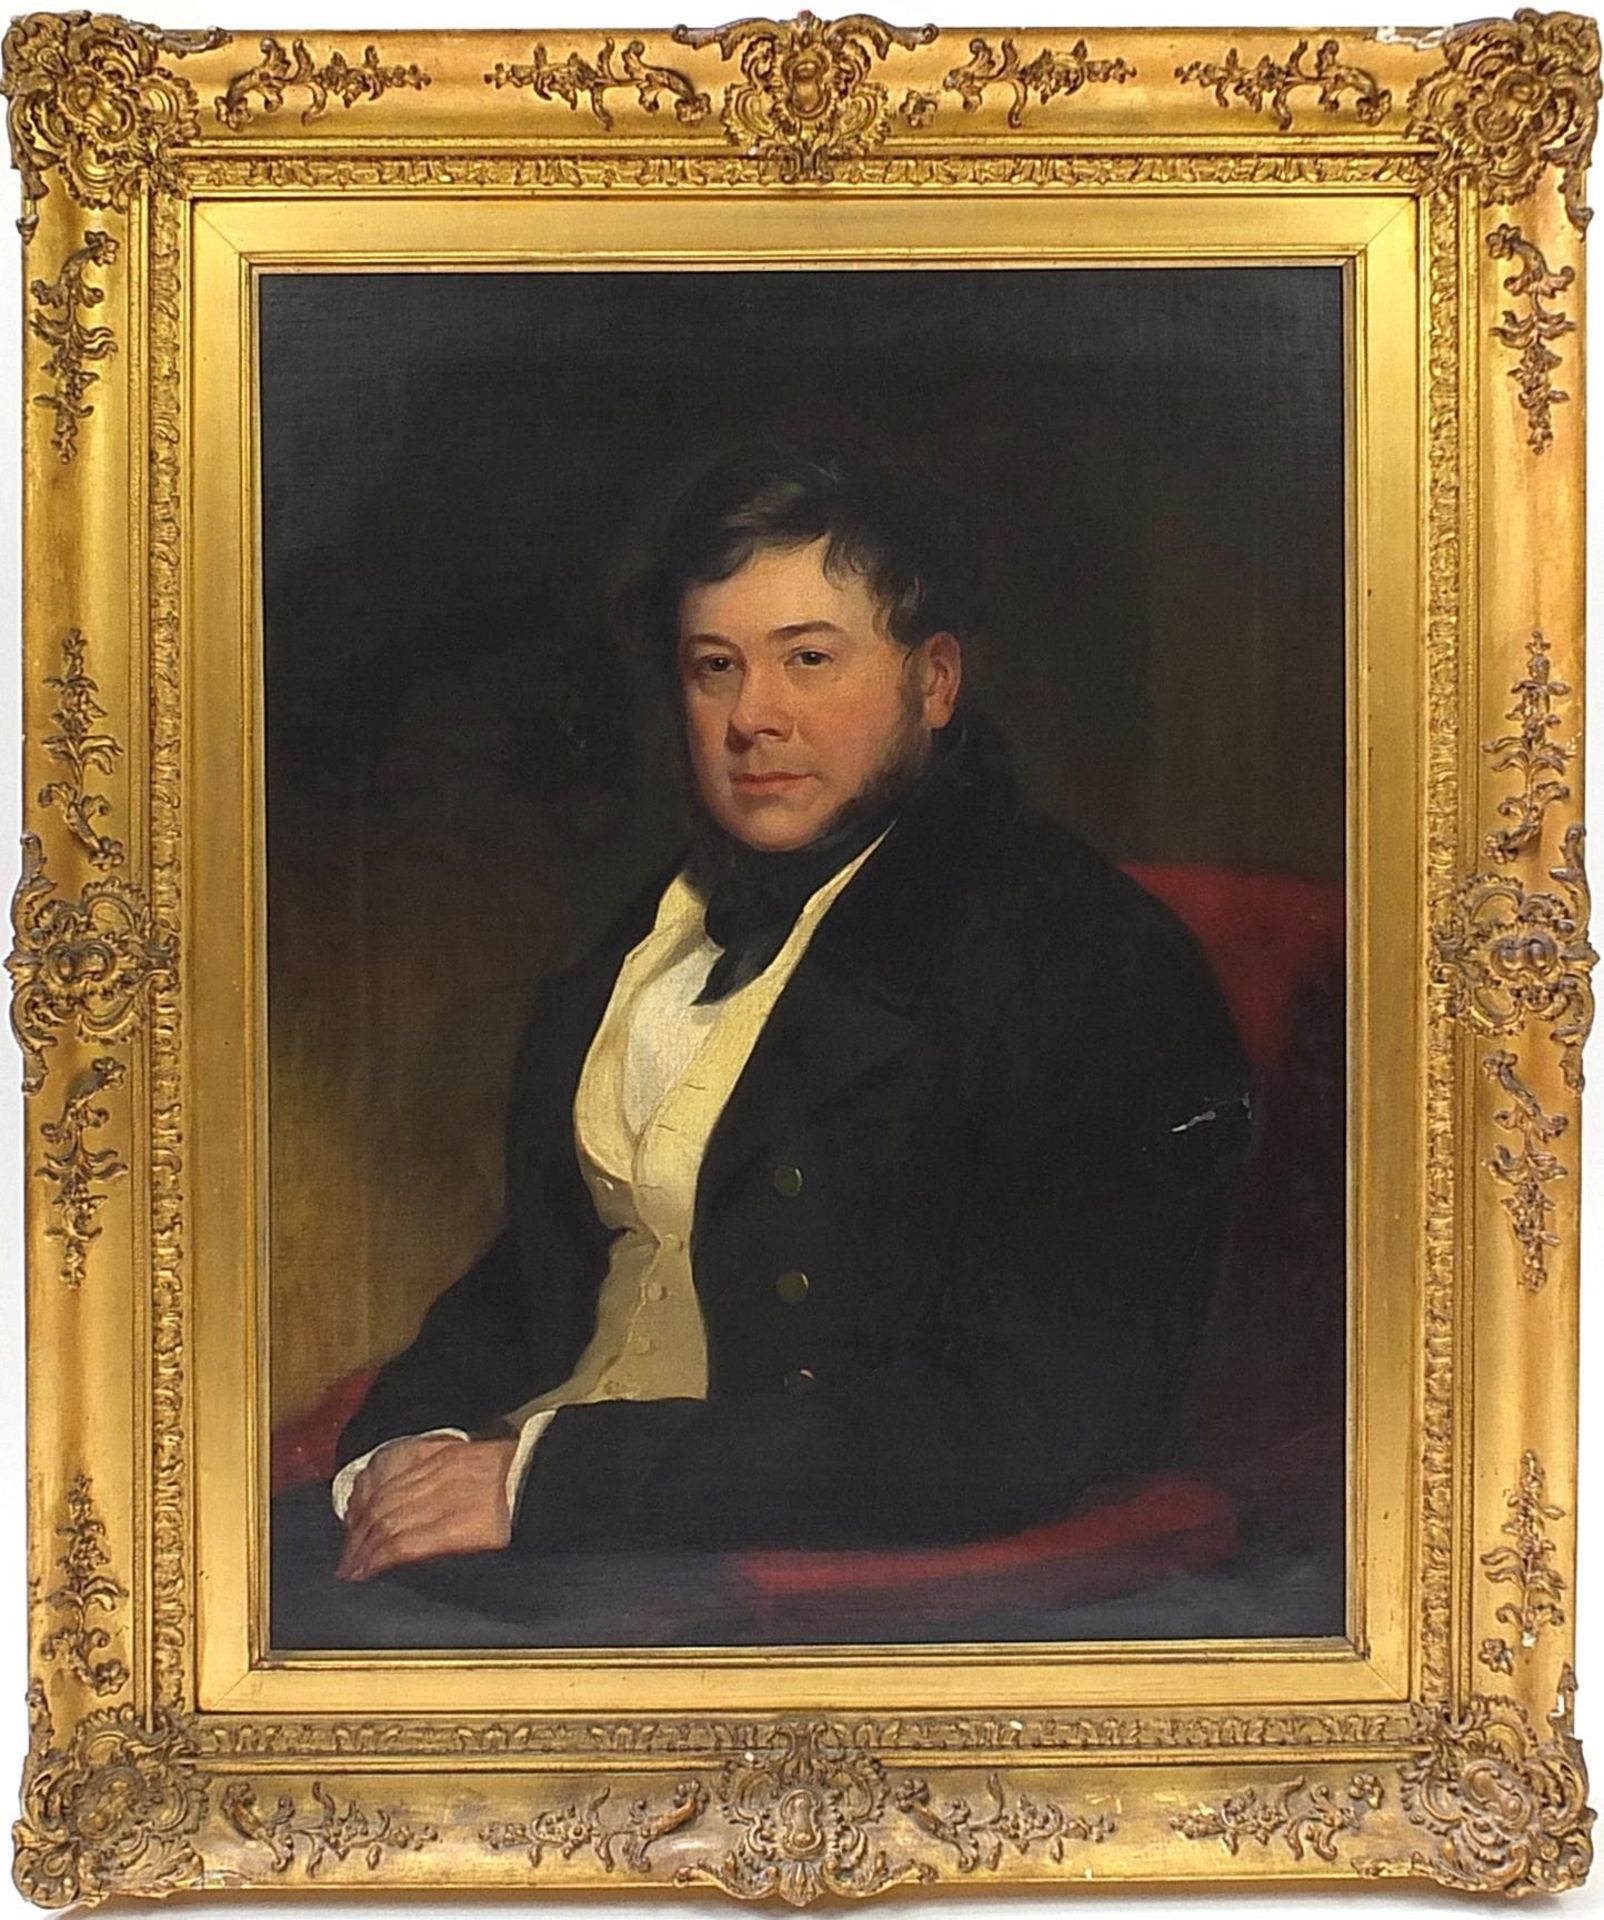 Attributed to Philip Augustus Gaugain - Portrait of a seated gentleman wearing a waistcoat an - Image 2 of 3